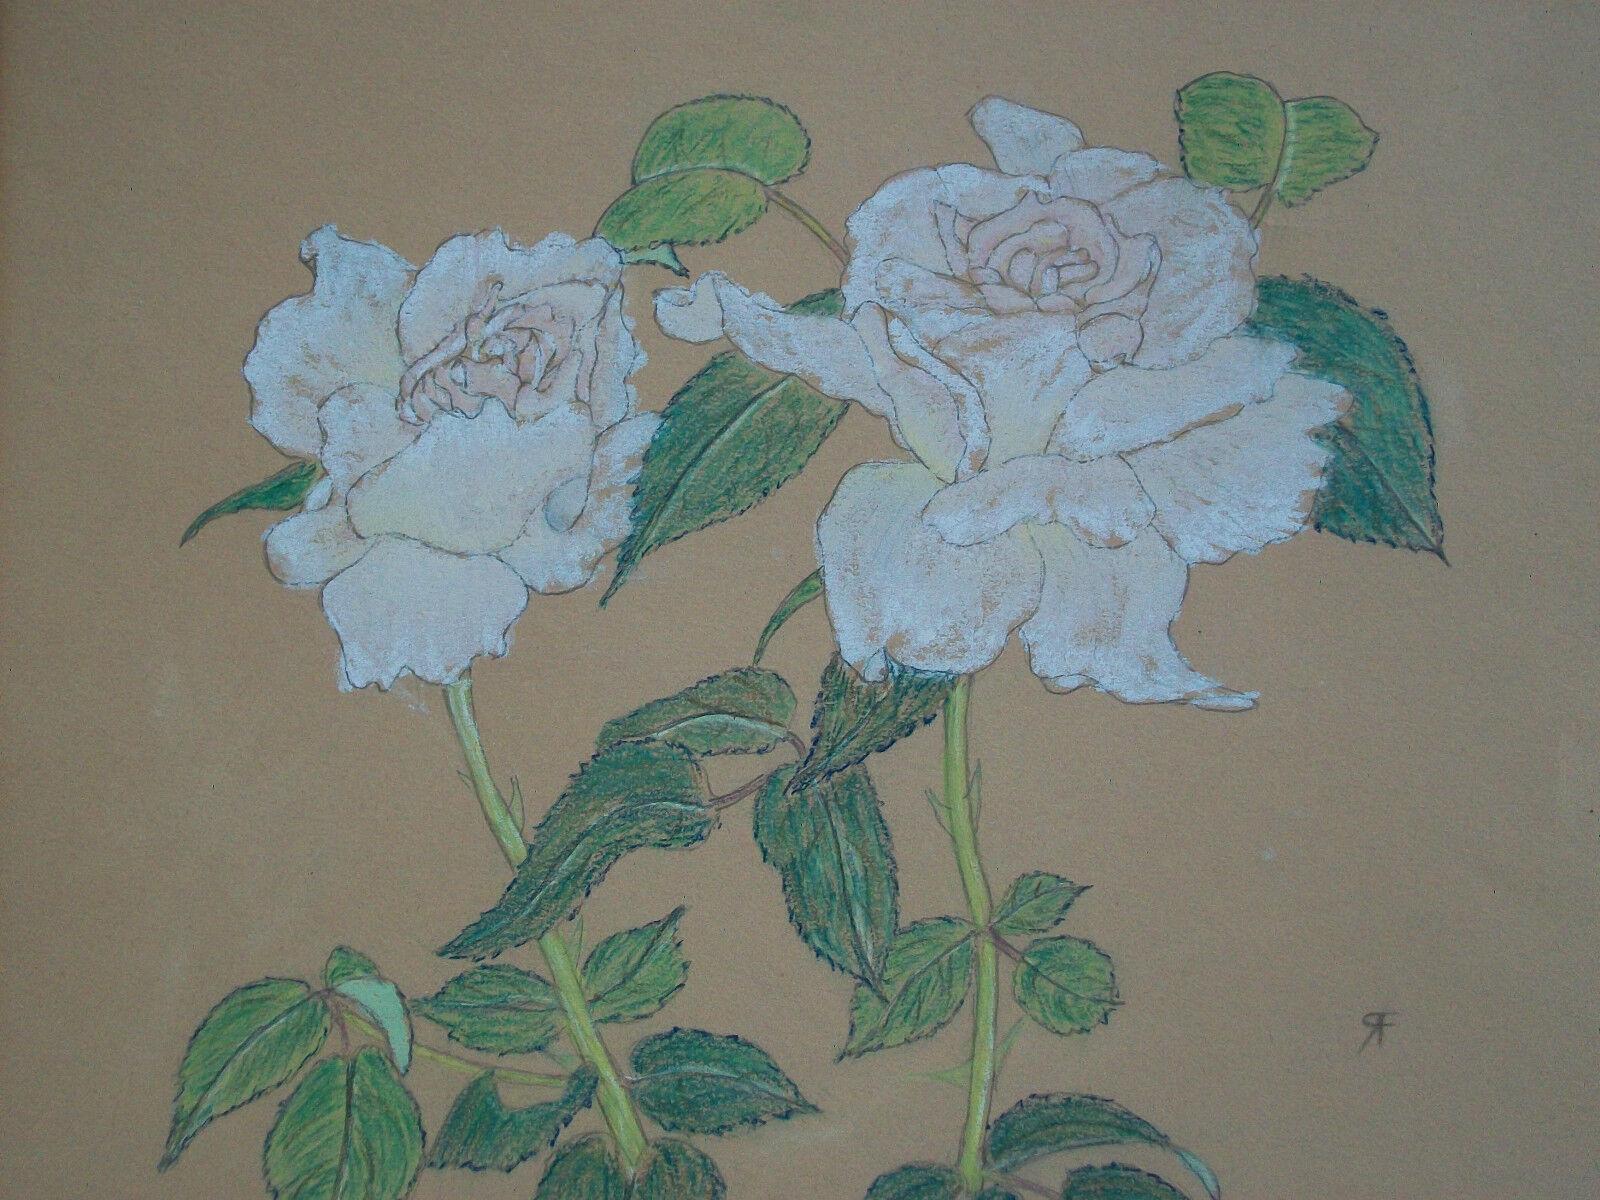 Vintage floral oil pastel drawing over graphite on buff paper - artist's cipher lower right - unframed - mid 20th century.

Good vintage condition - no loss - no damage - no restoration - bright & strong color - toning from a previous acidic